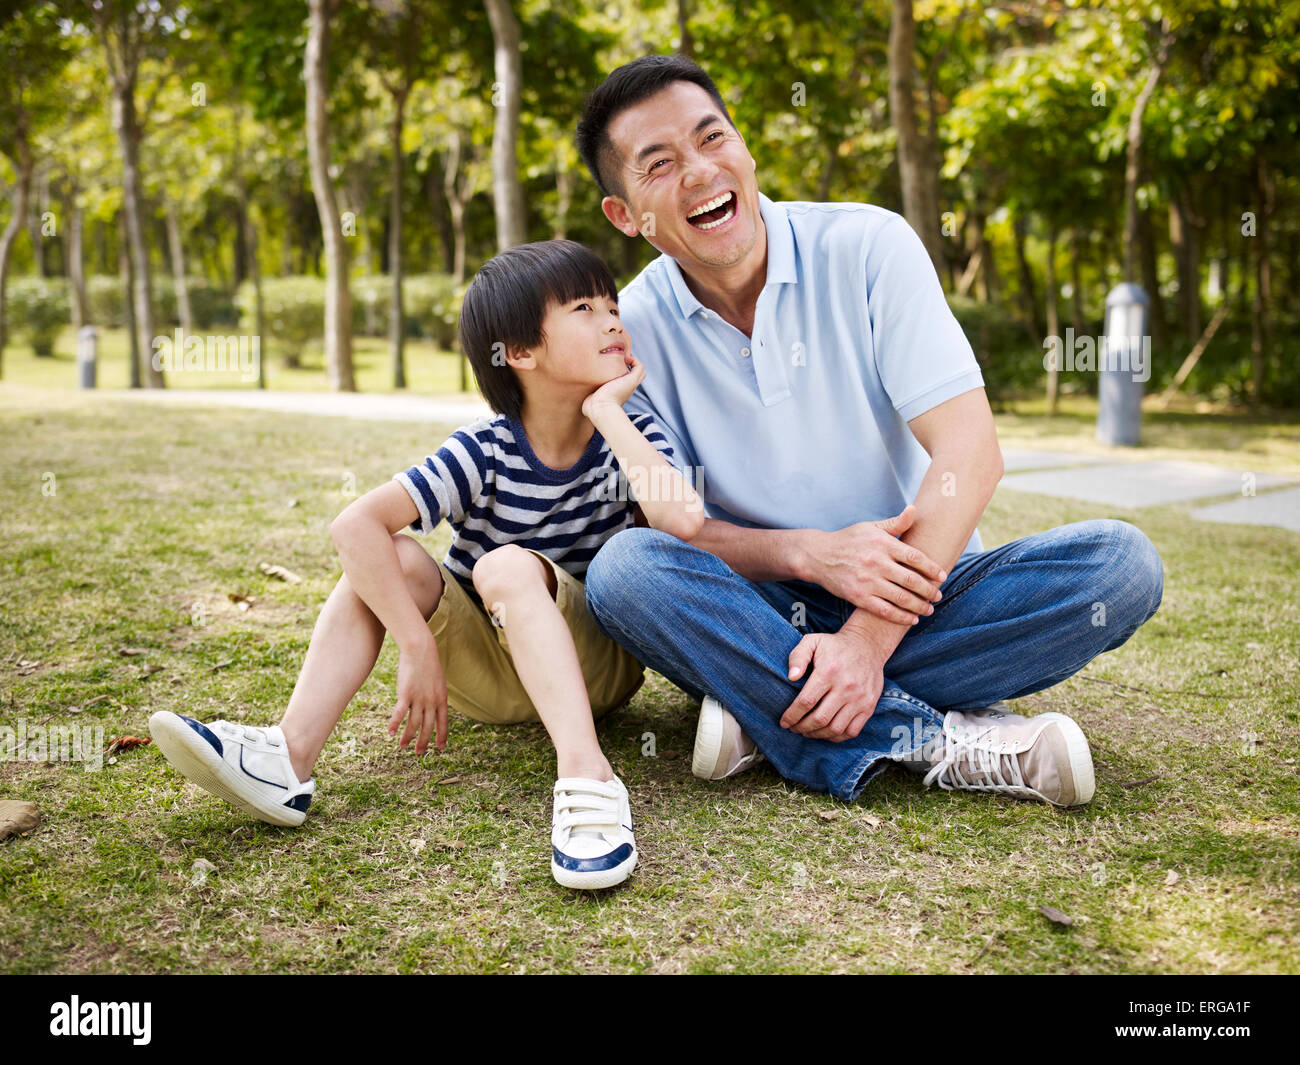 father and son talking in park Stock Photo